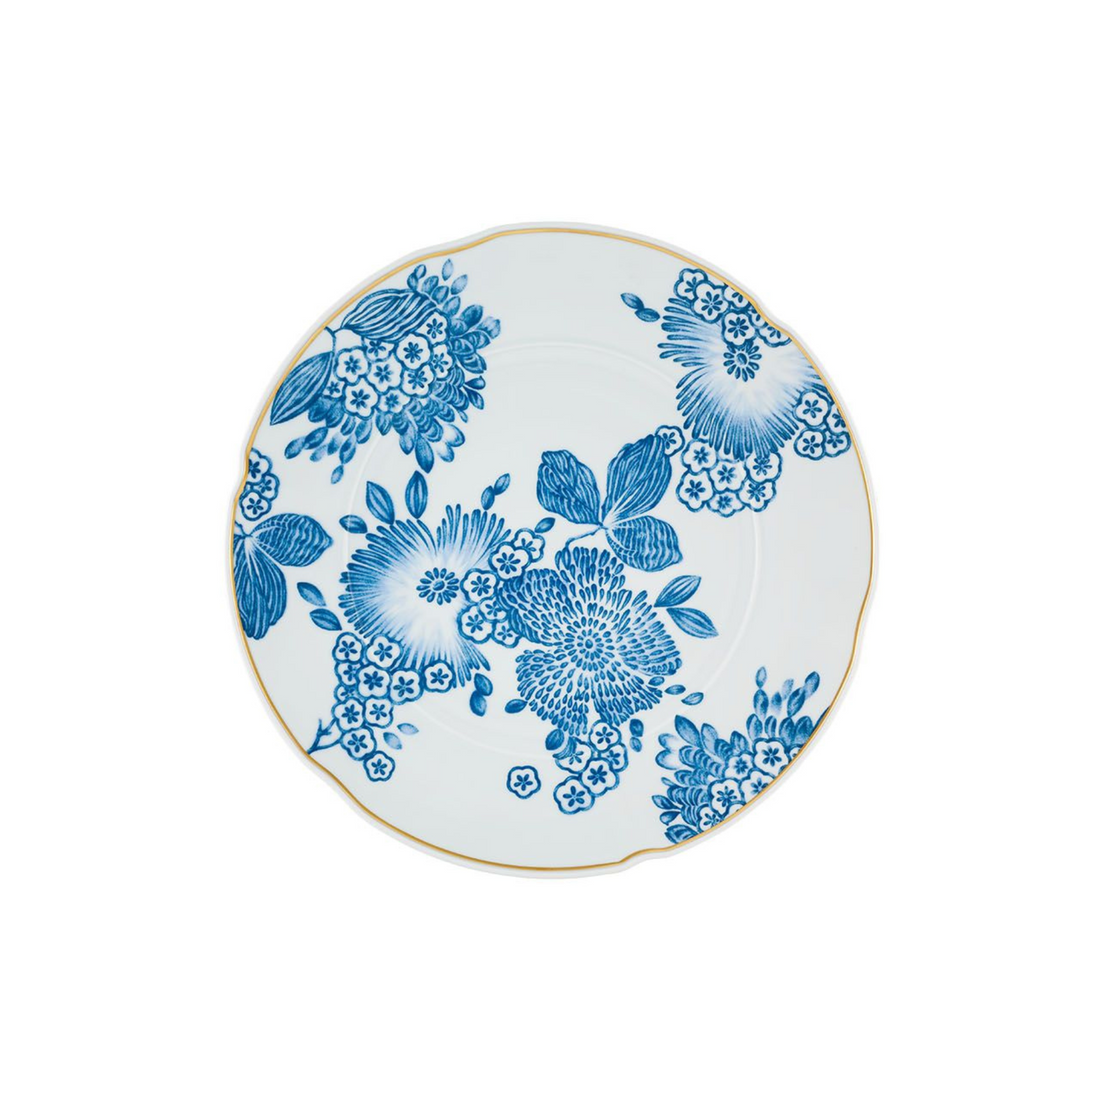 Coralina Blue Charger Plate